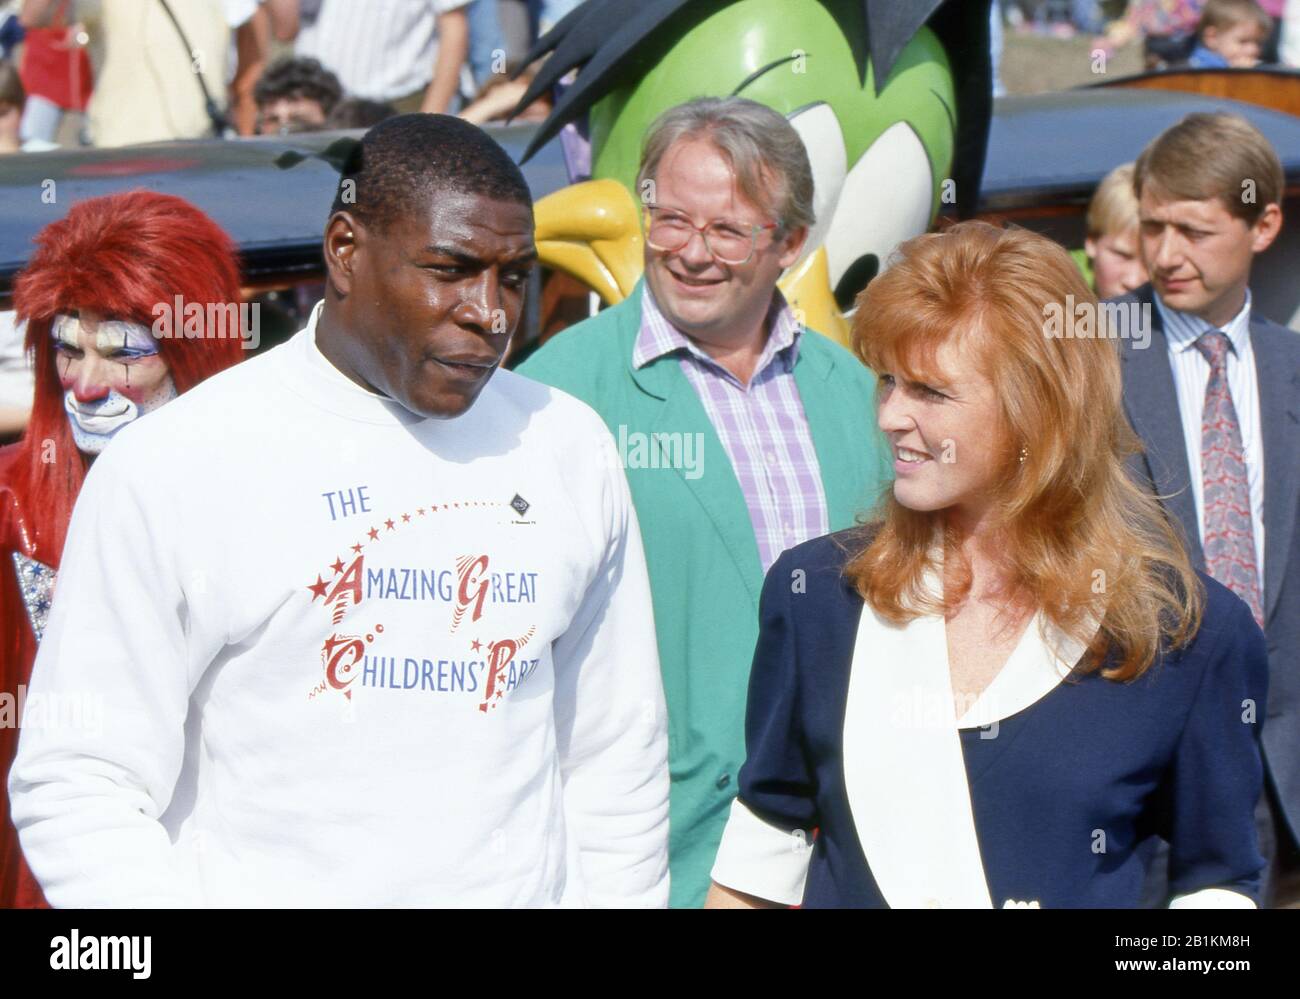 Boxer Frank Bruno, Christopher Biggins and Sarah Ferguson, Duchess of York at a Children's party in Battersea Park, London, England September 1990 Stock Photo